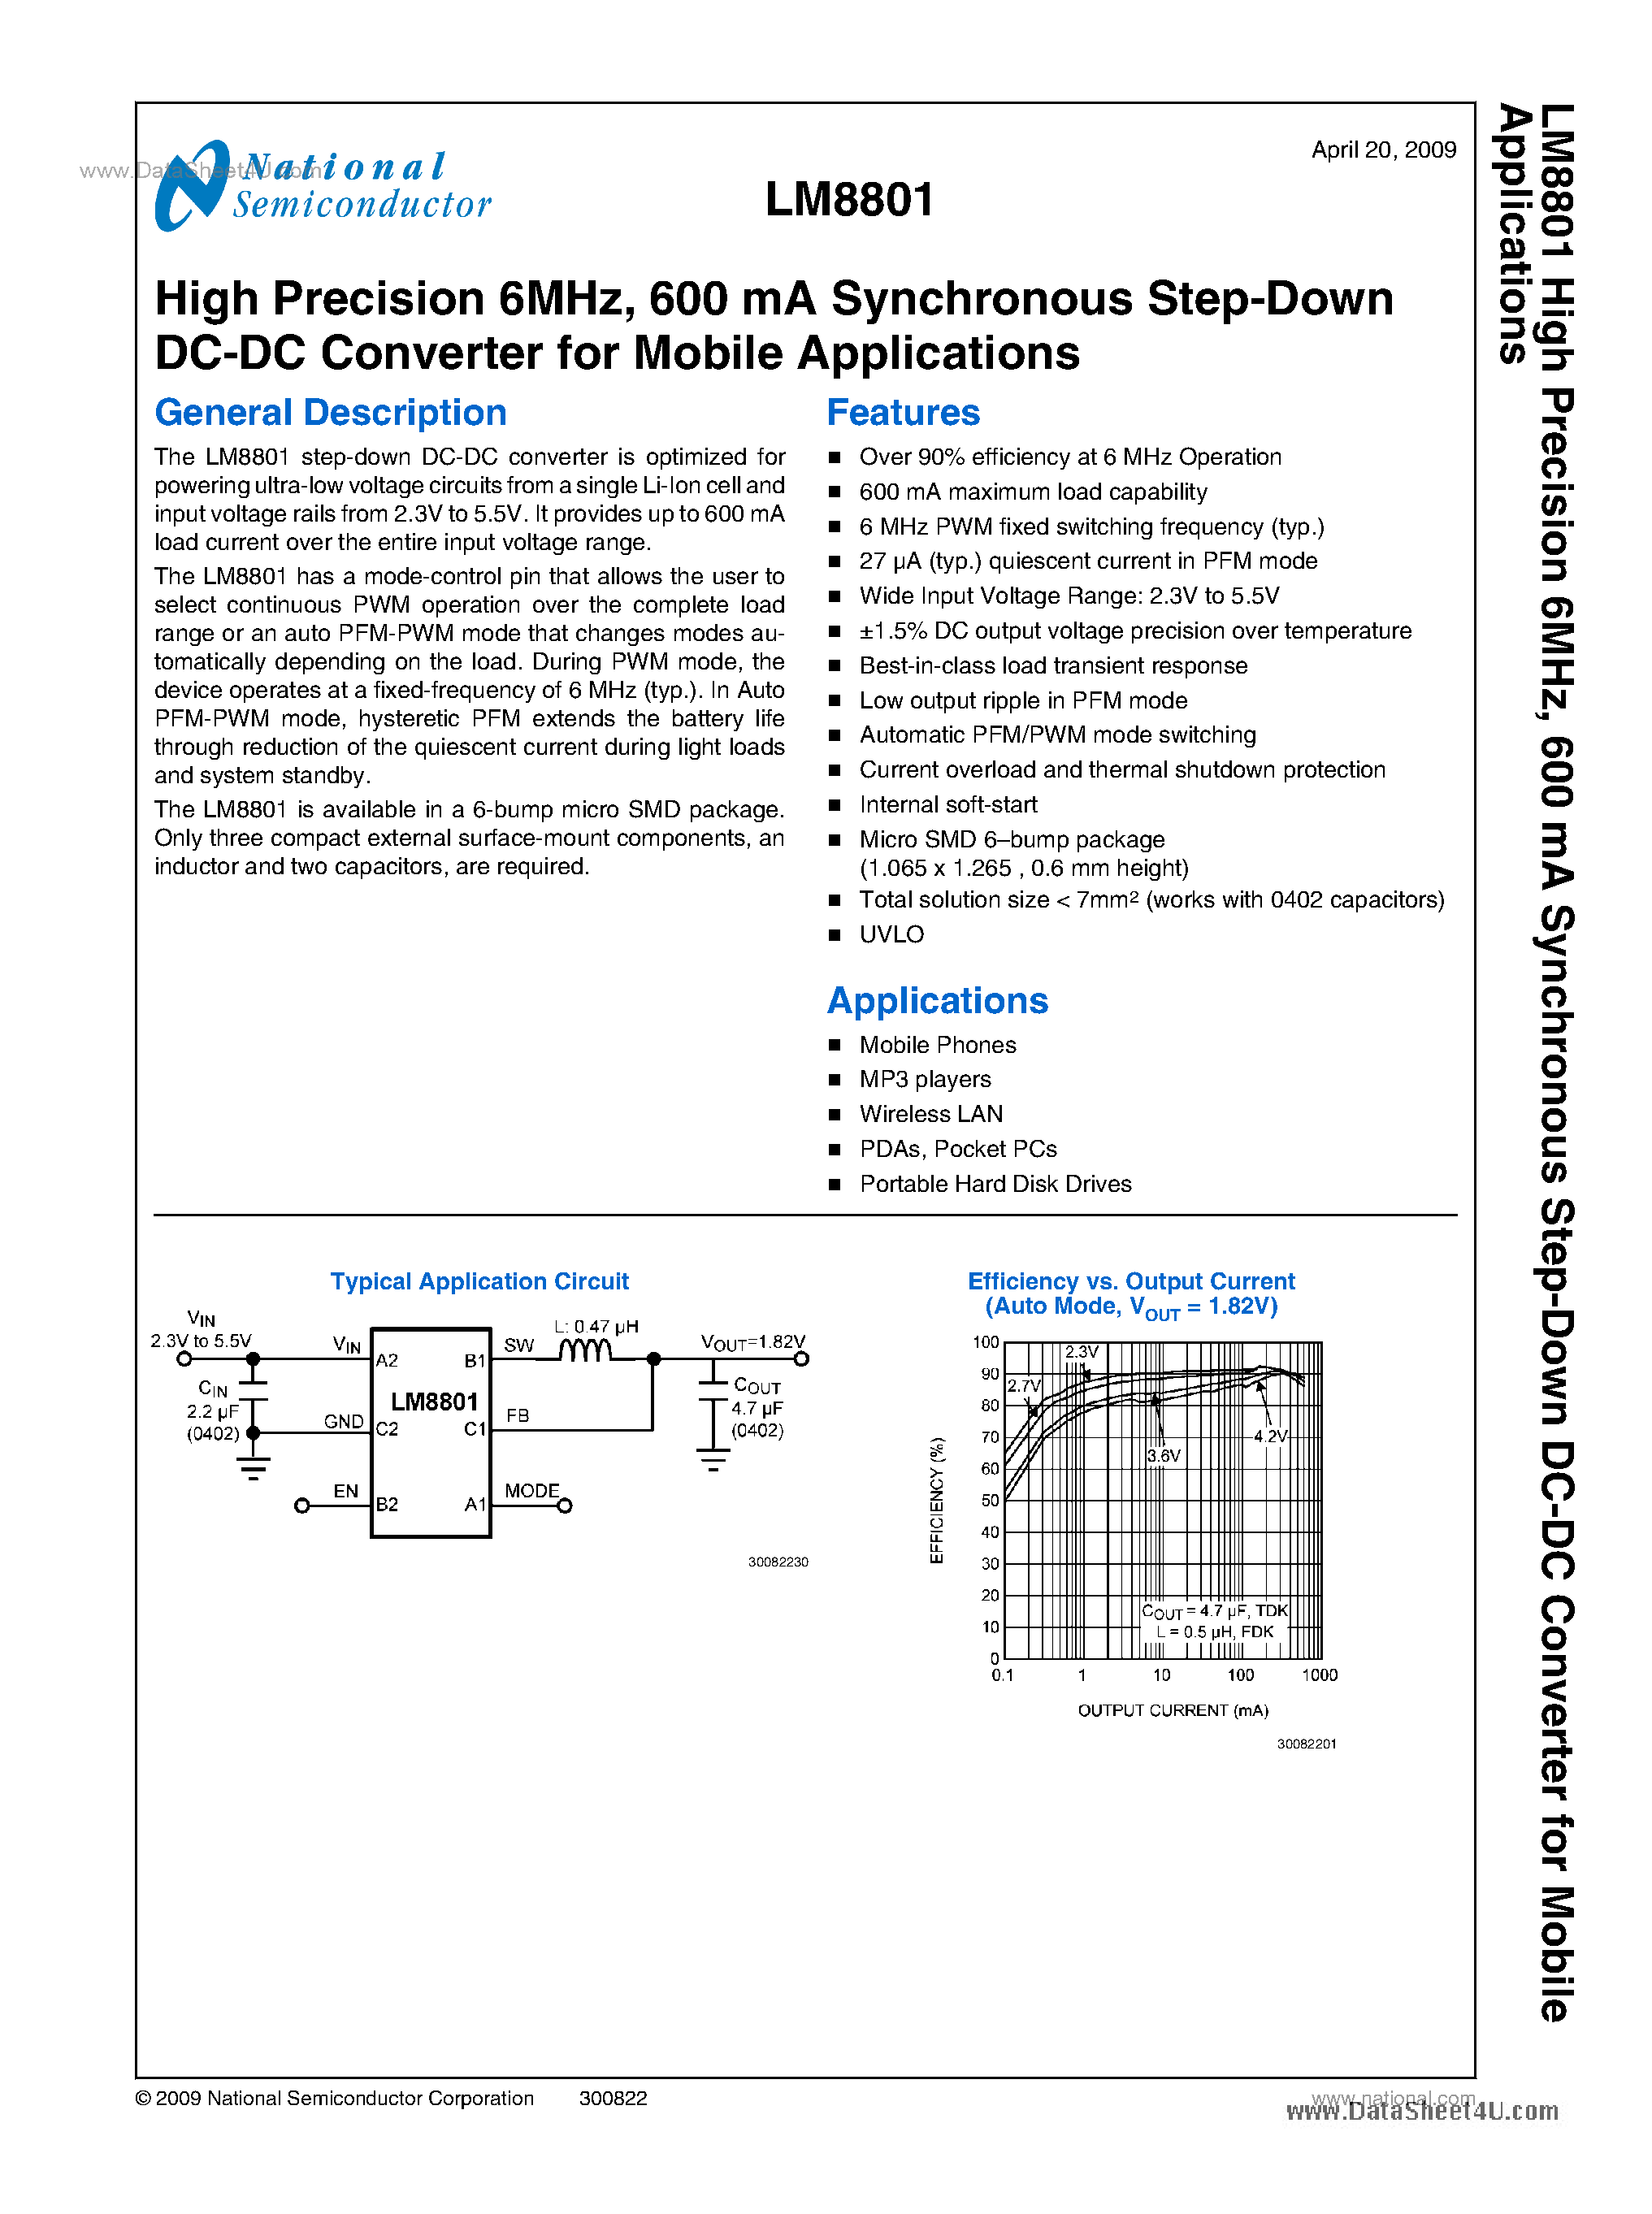 Datasheet LM8801 - 600 mA Synchronous Step-Down DC-DC Converter page 1